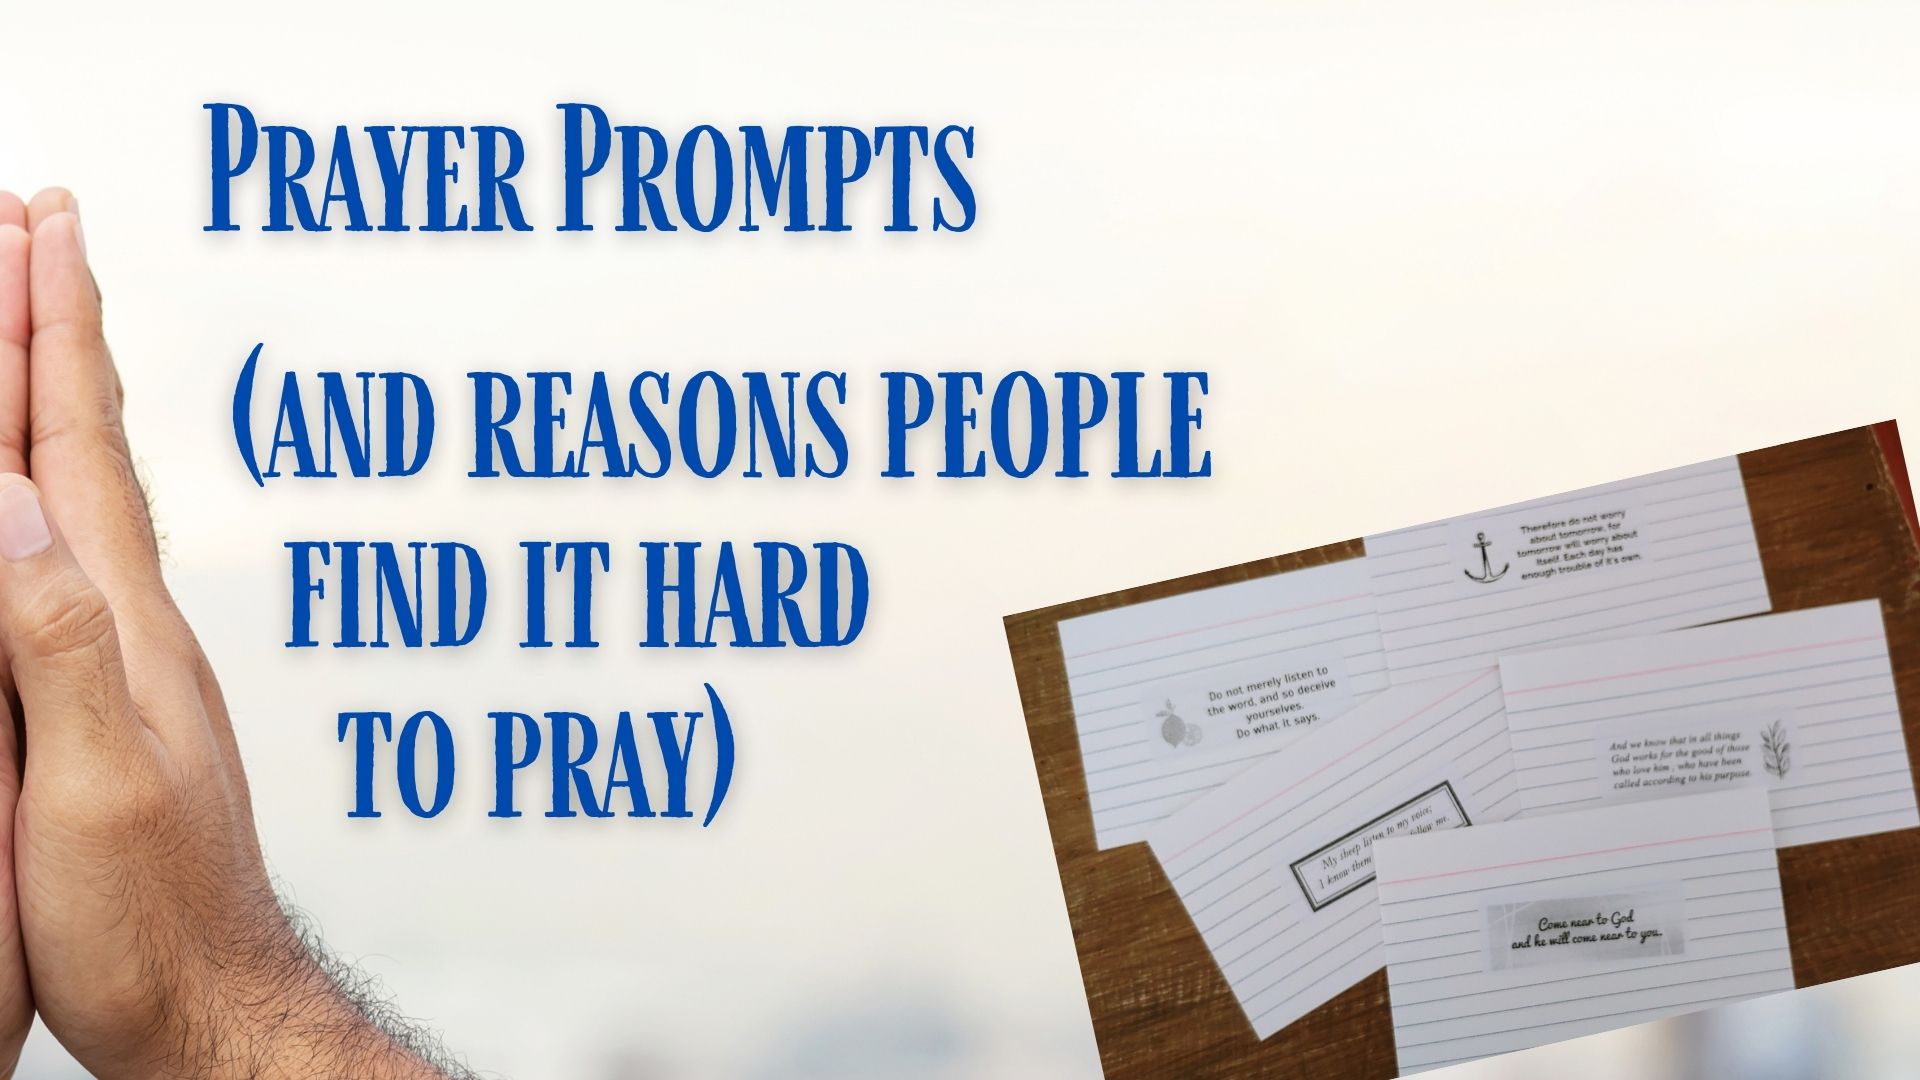 Prayer Prompts - Faith-at-Home Focus, week of May 15, 2022